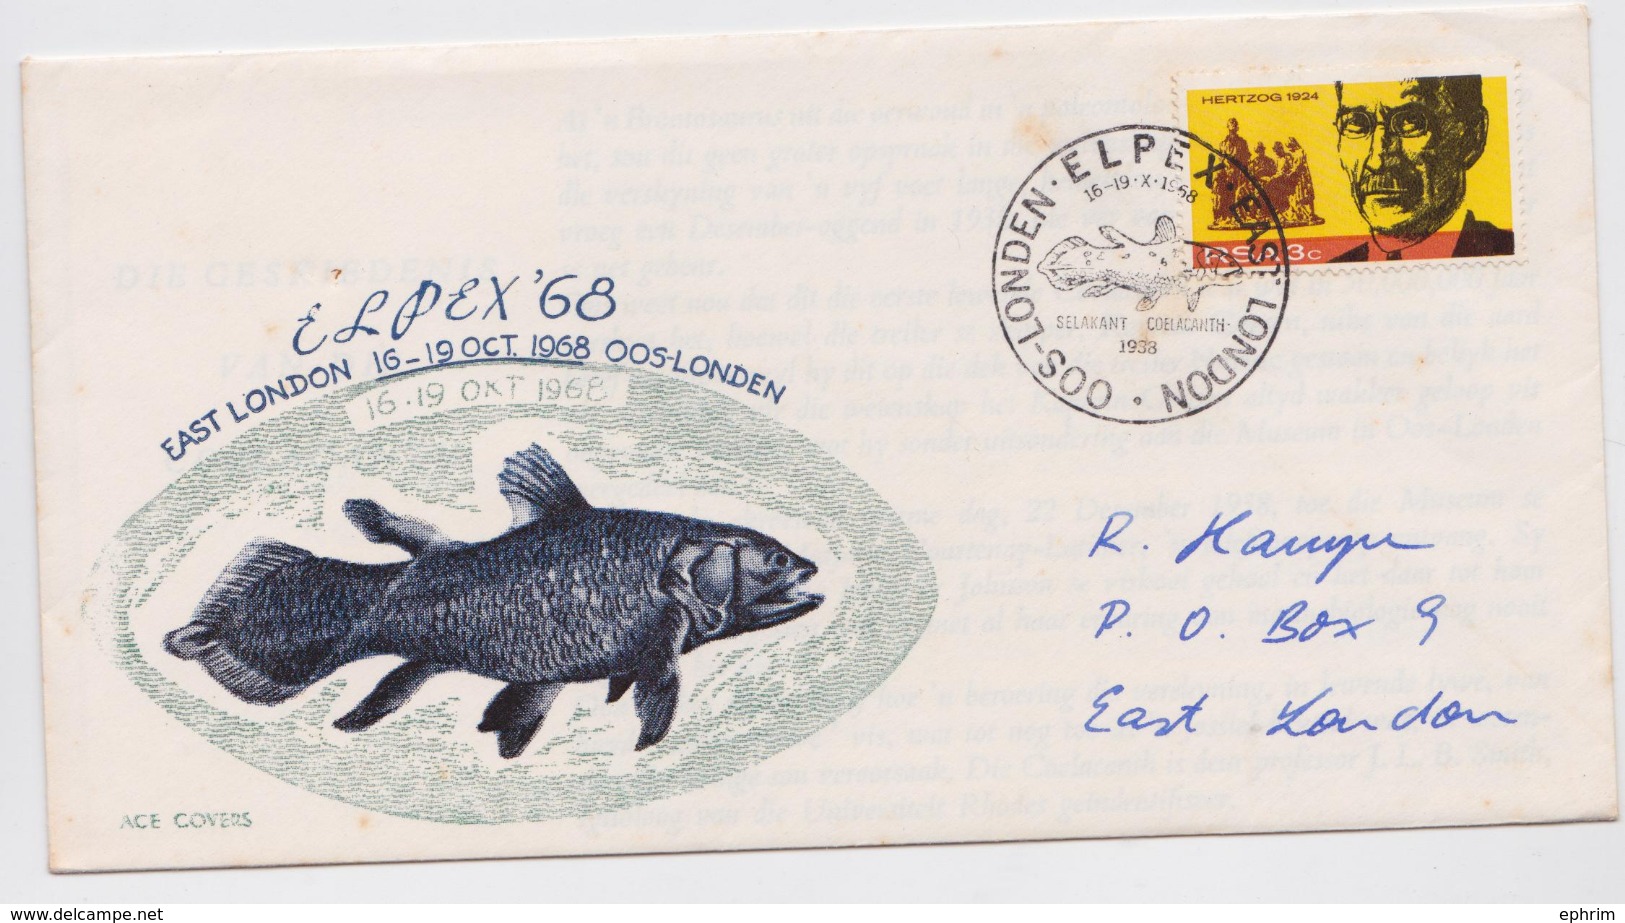 ELPEX EAST LONDON 1968 SOUTH AFRICA ENVELOPPE POISSON FOSSILE COELACANTHE - FOSSIL COELACANTH FISH COMMEMORATIVE COVER - Fossilien